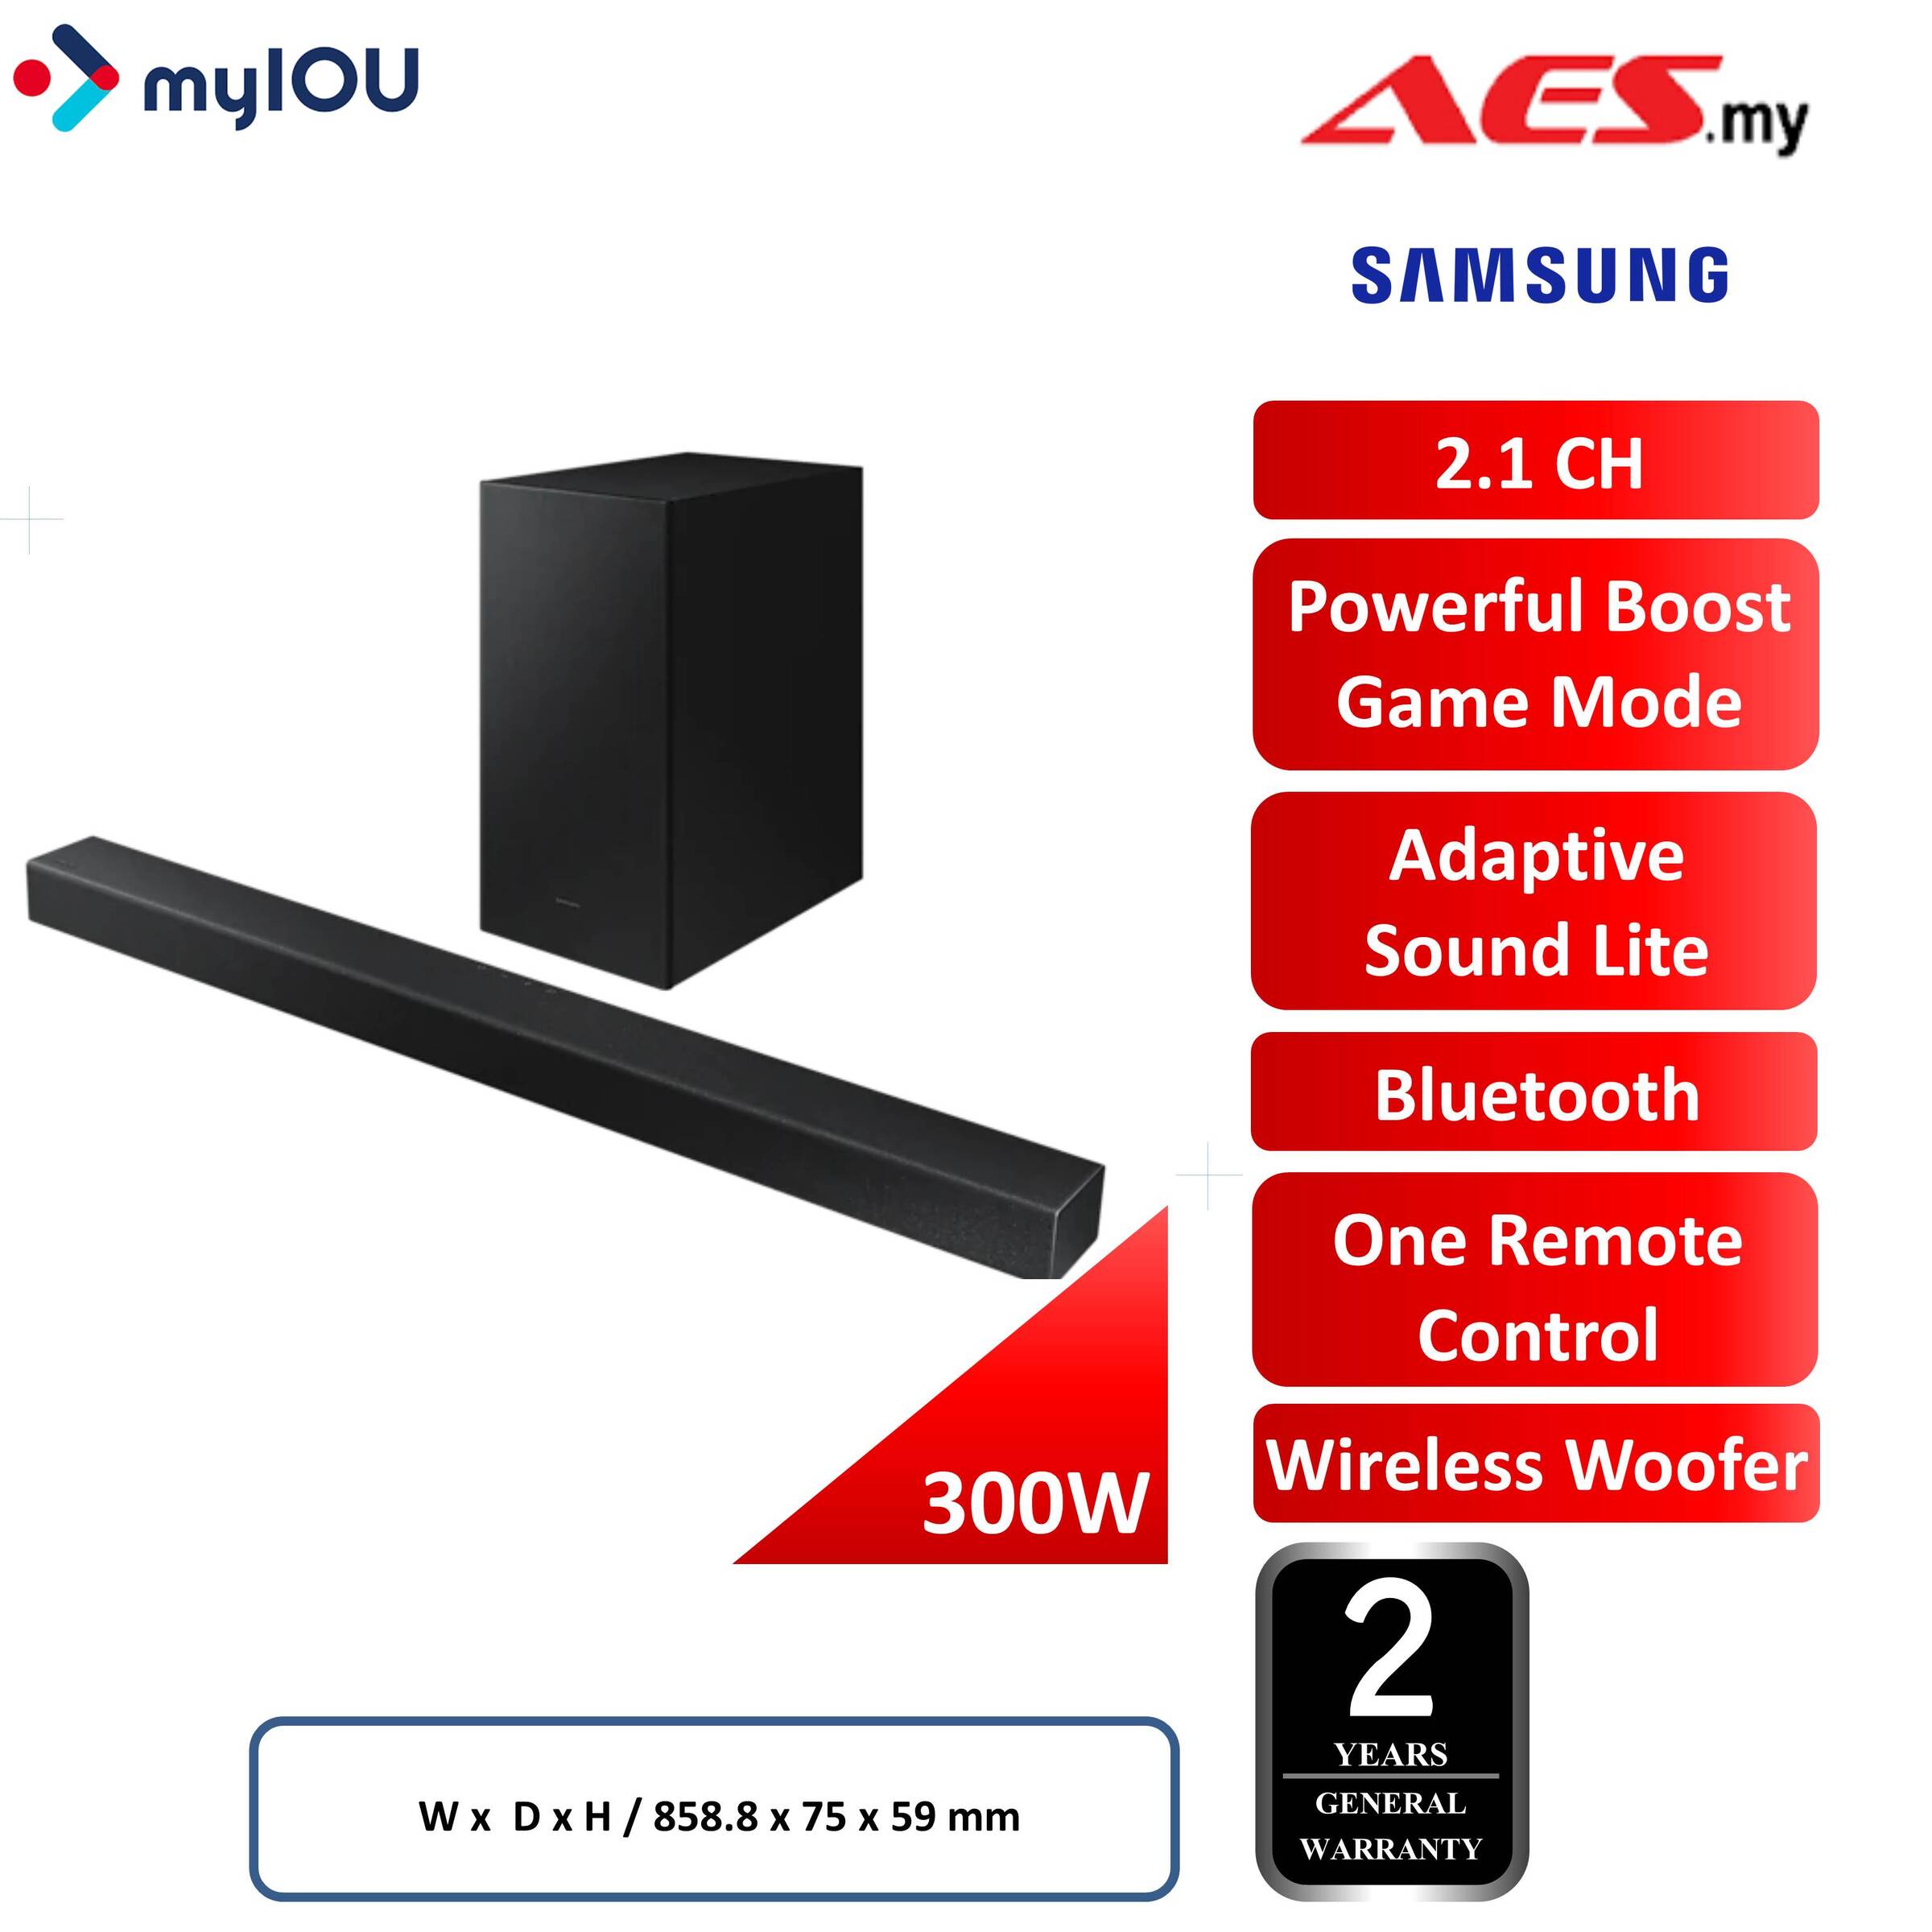 SAMSUNG HW-B450/XM 2.1 CHANNEL 300W DOLBY AUDIO DTS VIRTUAL:X BASS BOOST SOUND  BAR – A.E.S ELECTRICAL SUPERSTORE